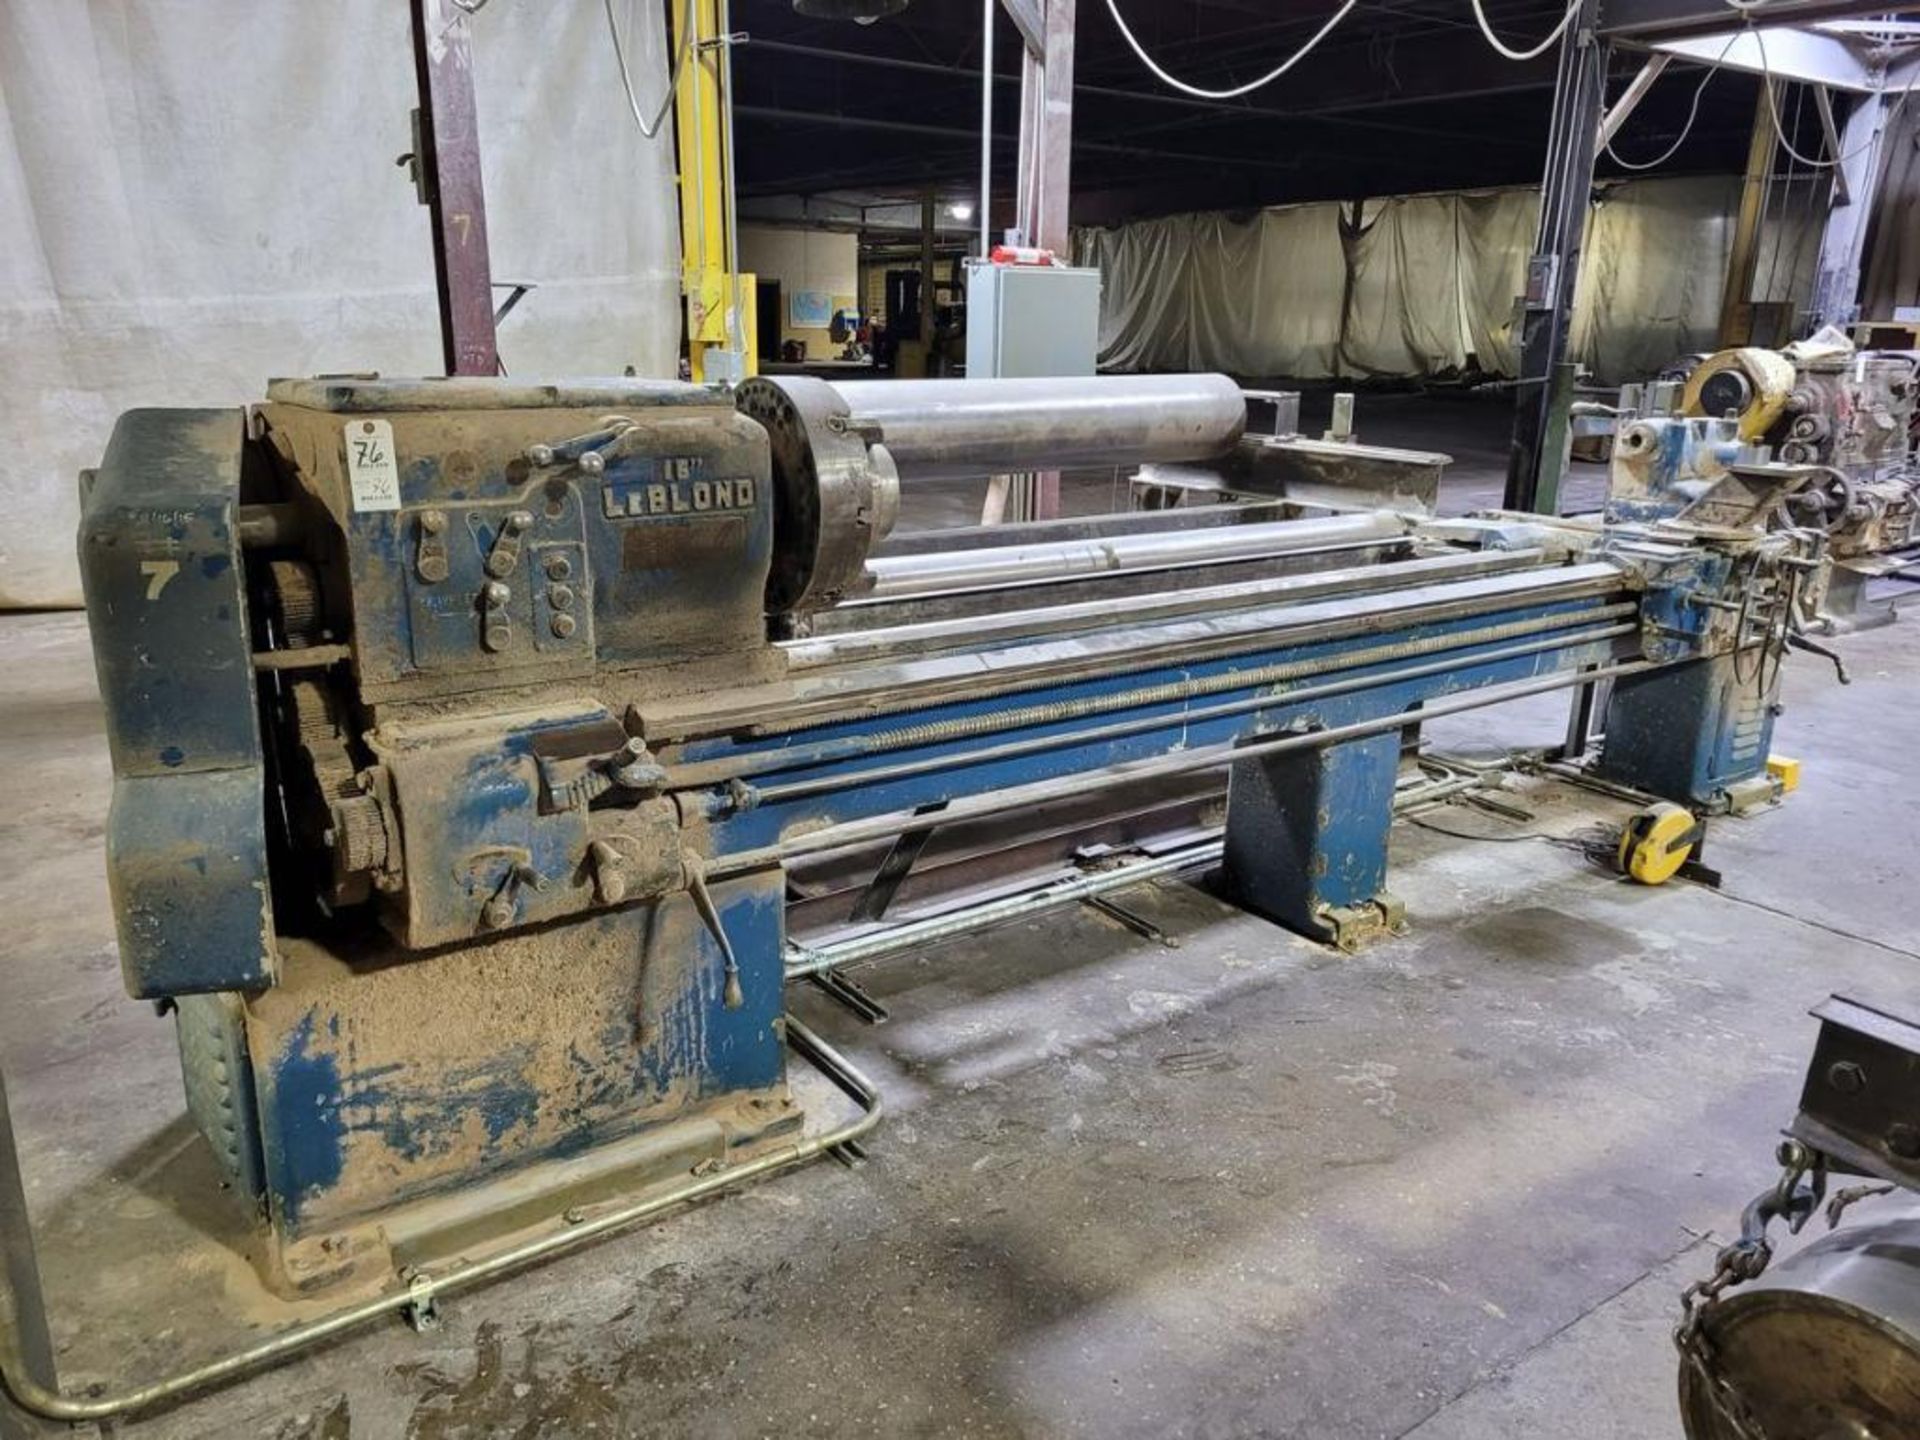 LeBlond Converted Rubber Belt Grinding Lathe: 15-1010 Spindle RPM, Approx. 16" Swing, Approx. 120" B